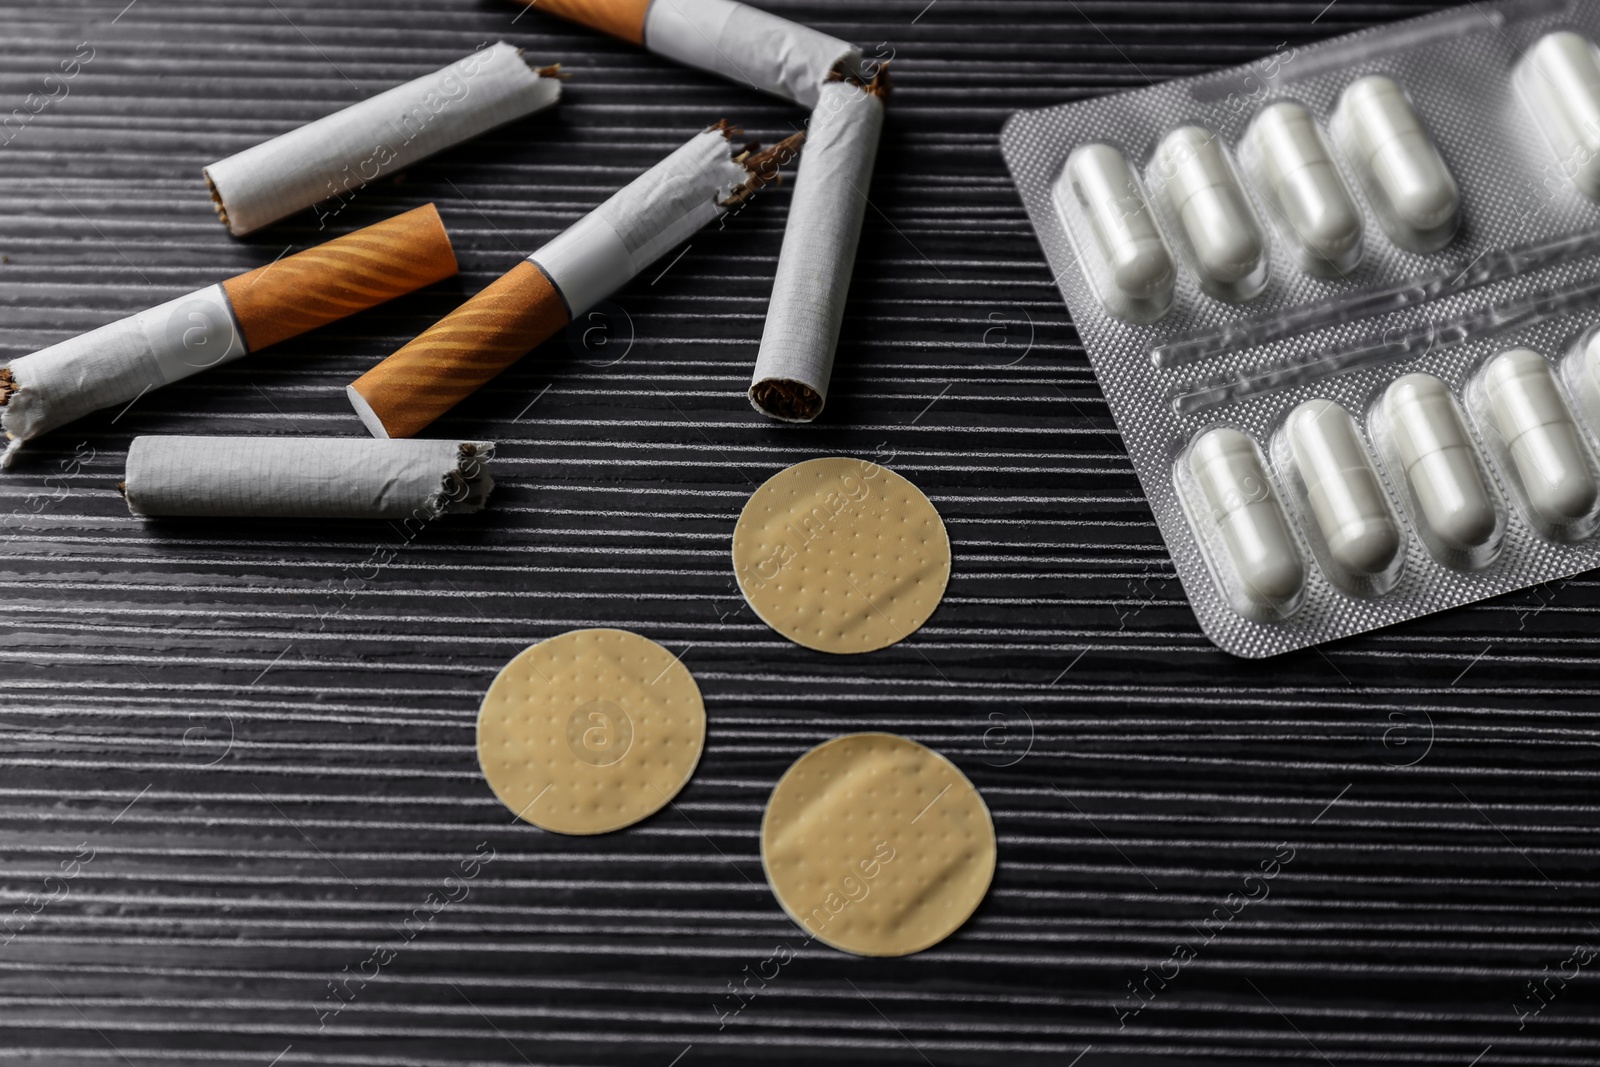 Photo of Nicotine patches, pills and broken cigarettes on black table, above view